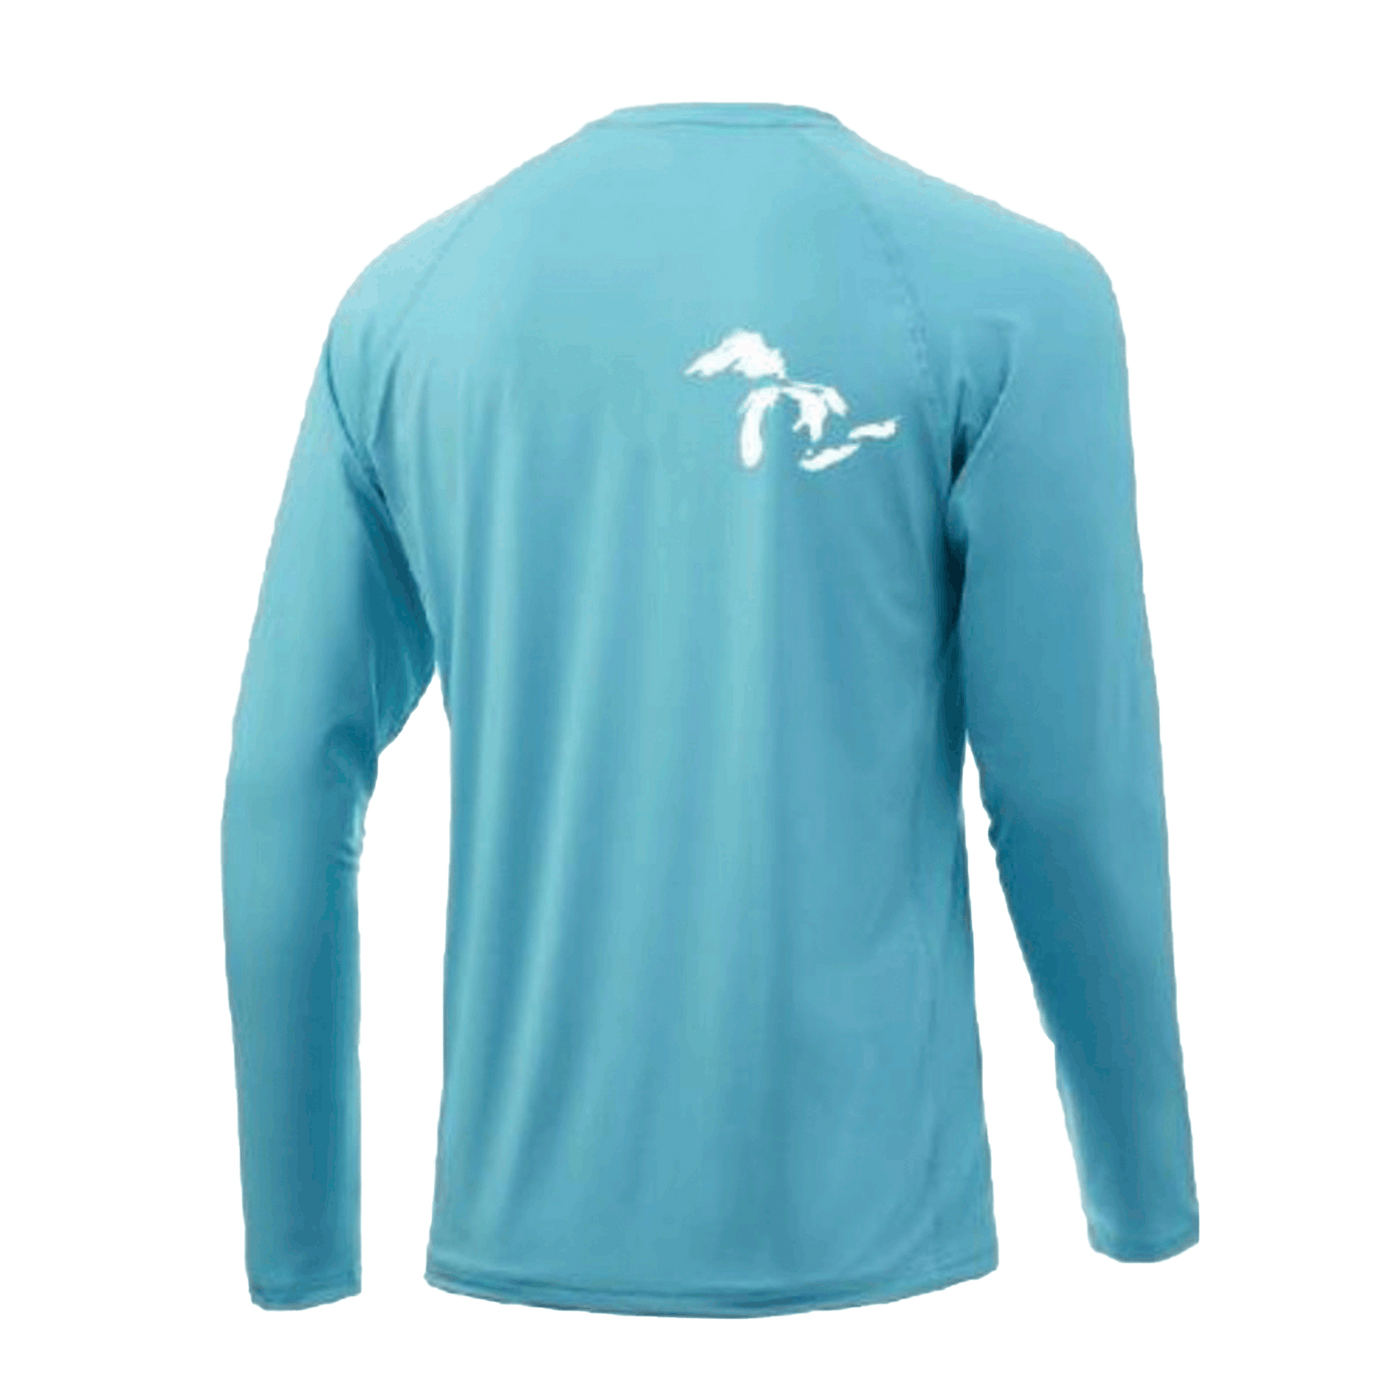 GREAT LAKES GEAR LONG SLEEVE BRIGHT BLUE